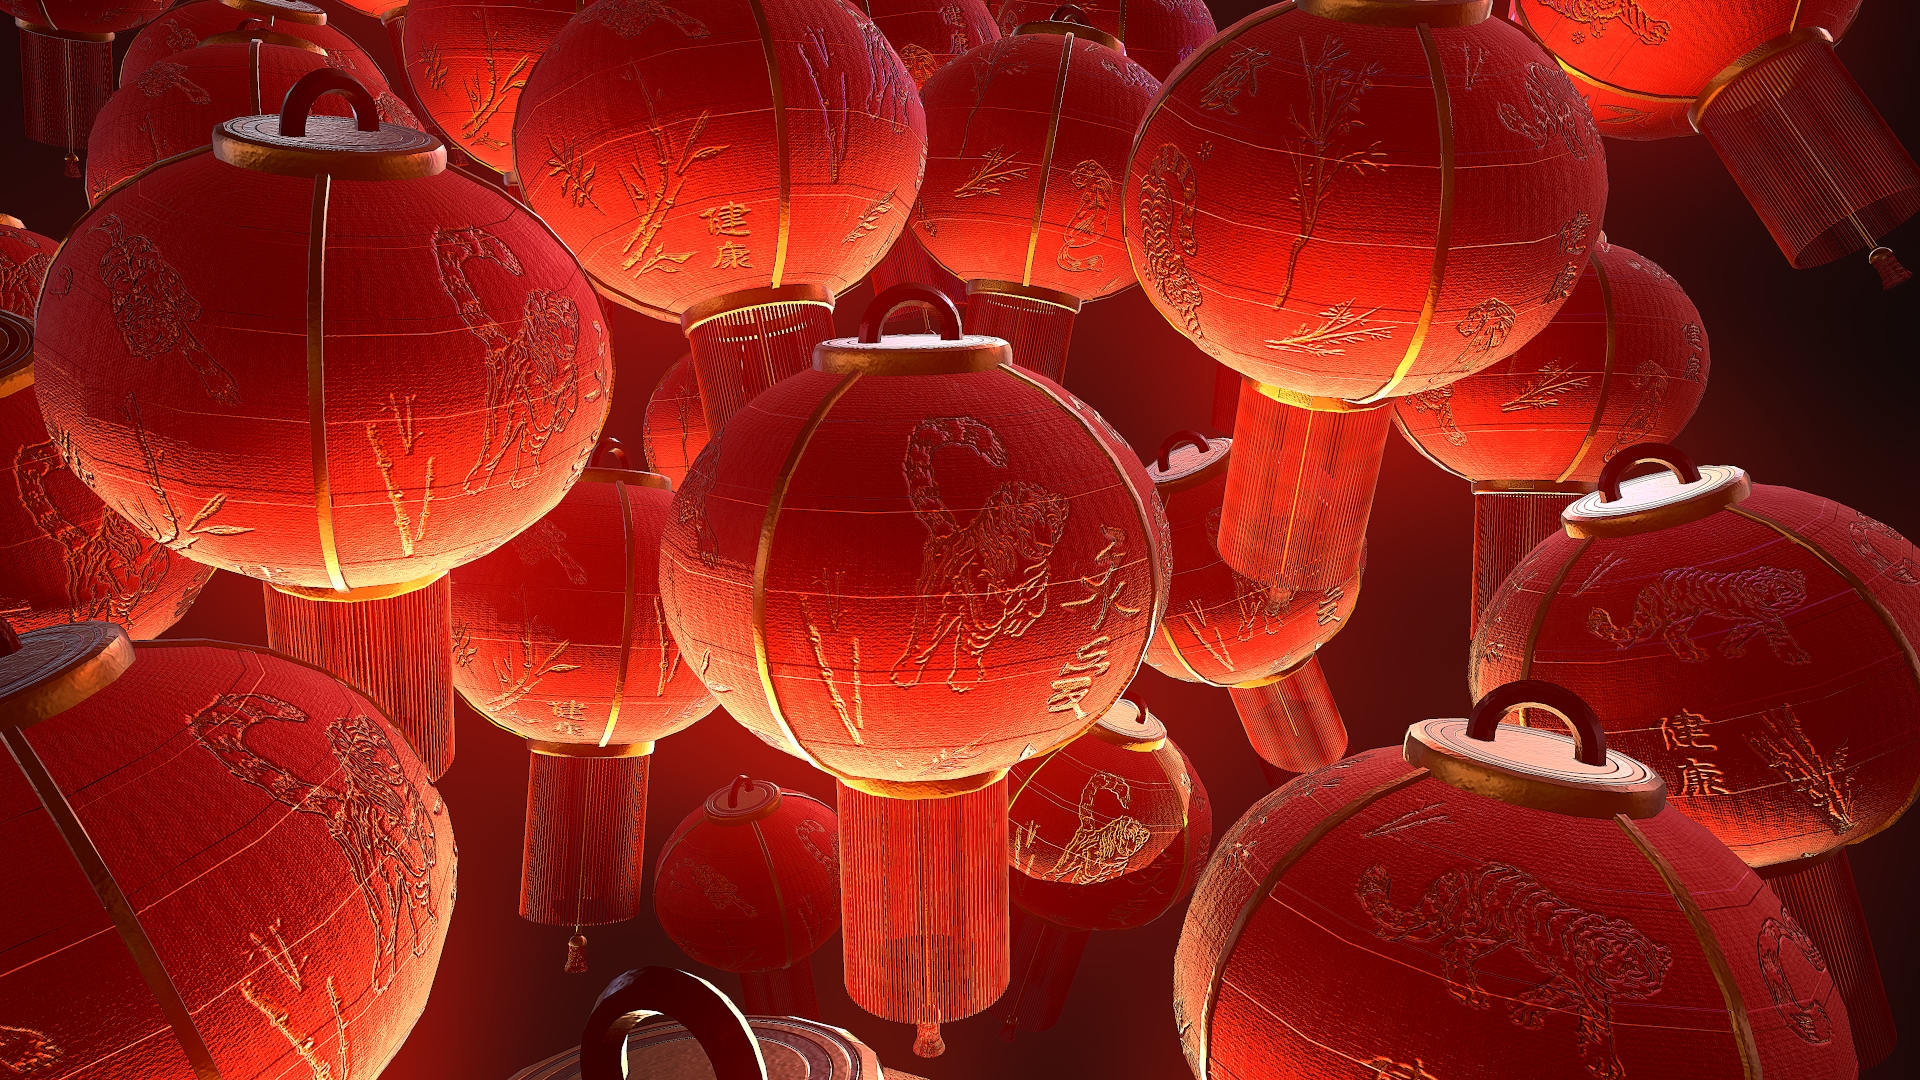 Red lanterns displaying chinese script and tiger designs. Made to represent the Chinese new year lanterns displayed for the Year of the Tiger celebrations.